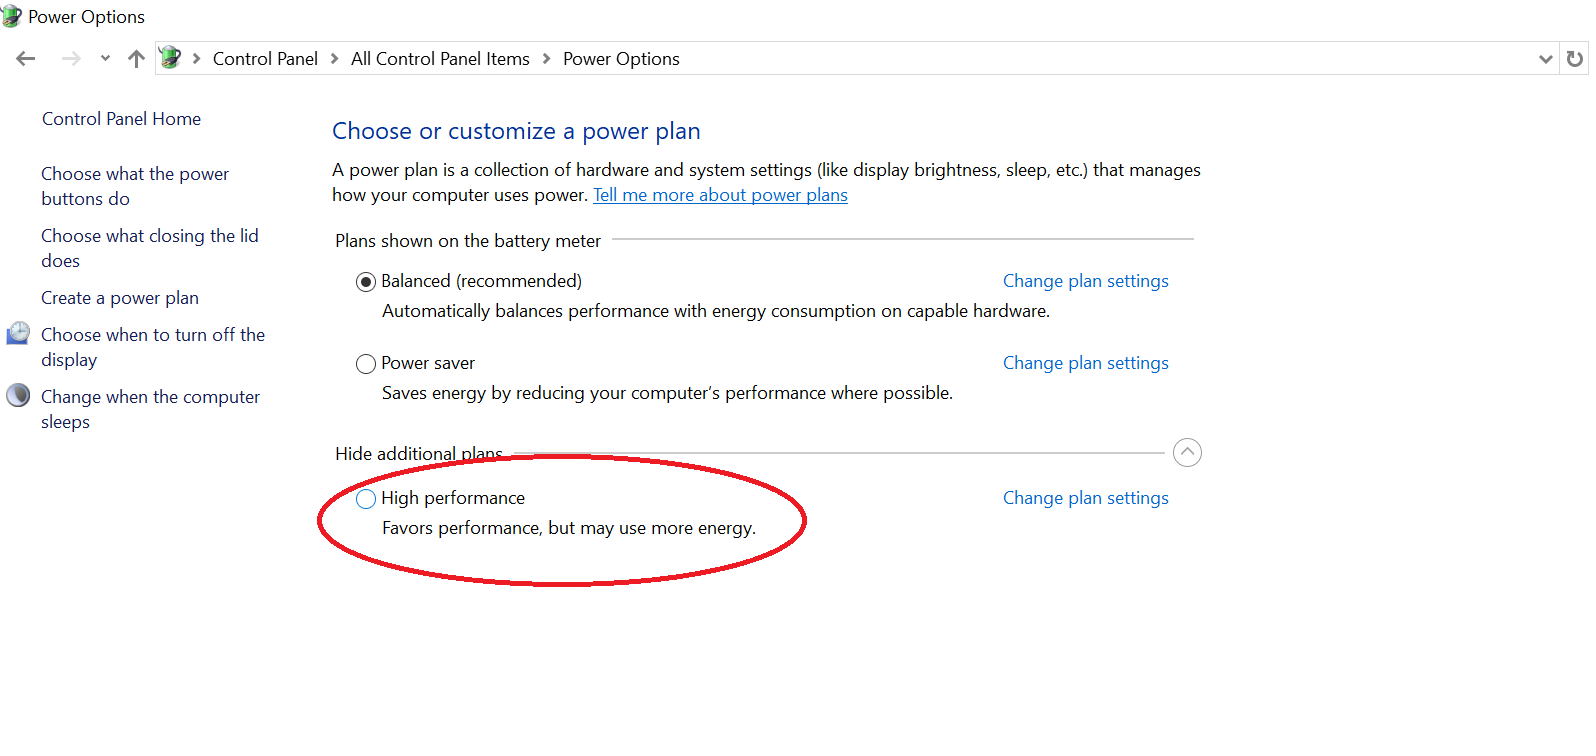 Screenshot of the Power Options settings menu available within Windows highlighting the High Performance setting